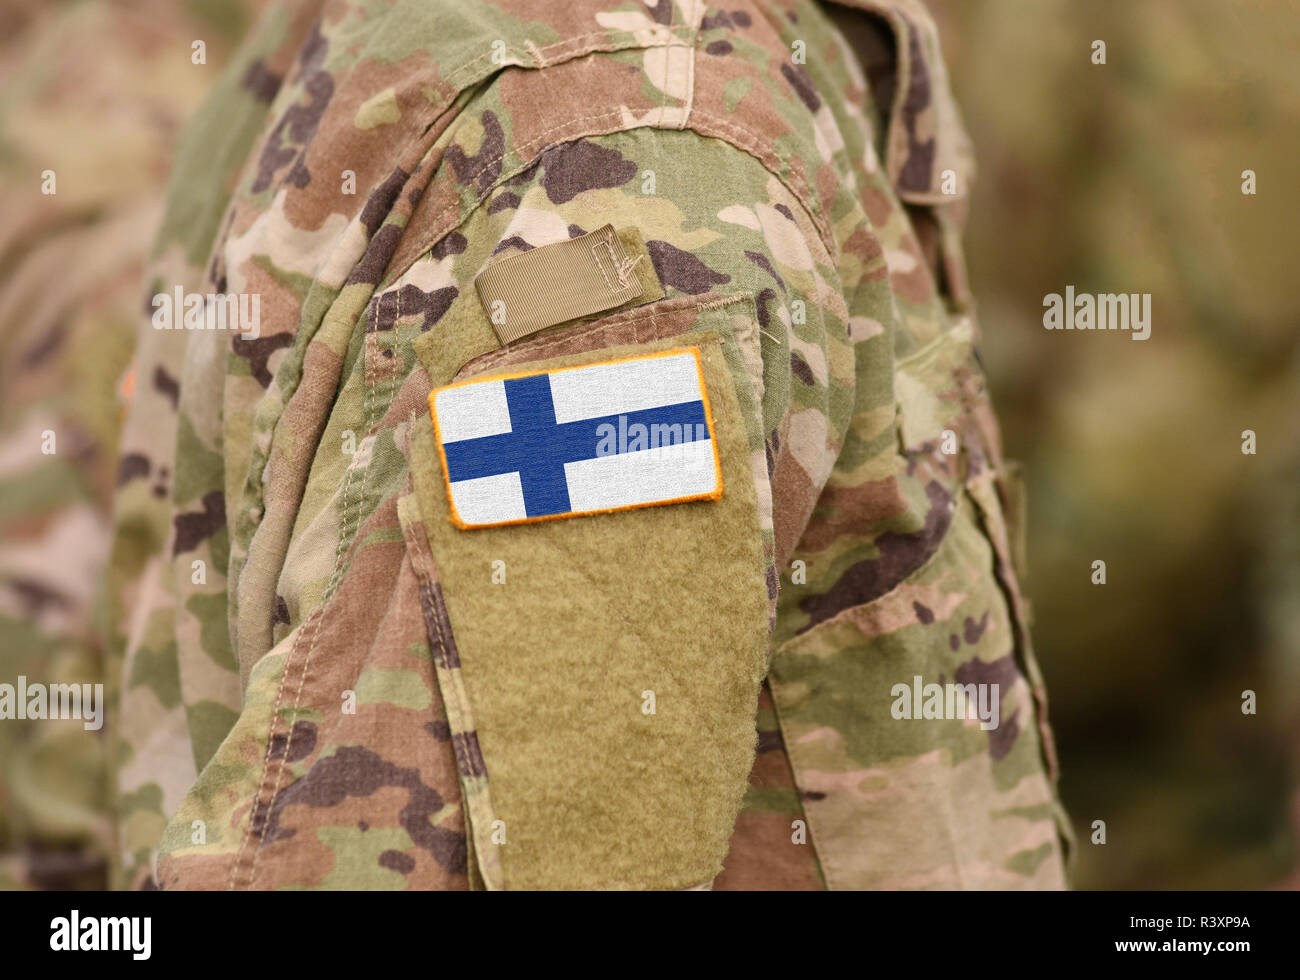 Finland flag on soldiers arm (collage). Stock Photo